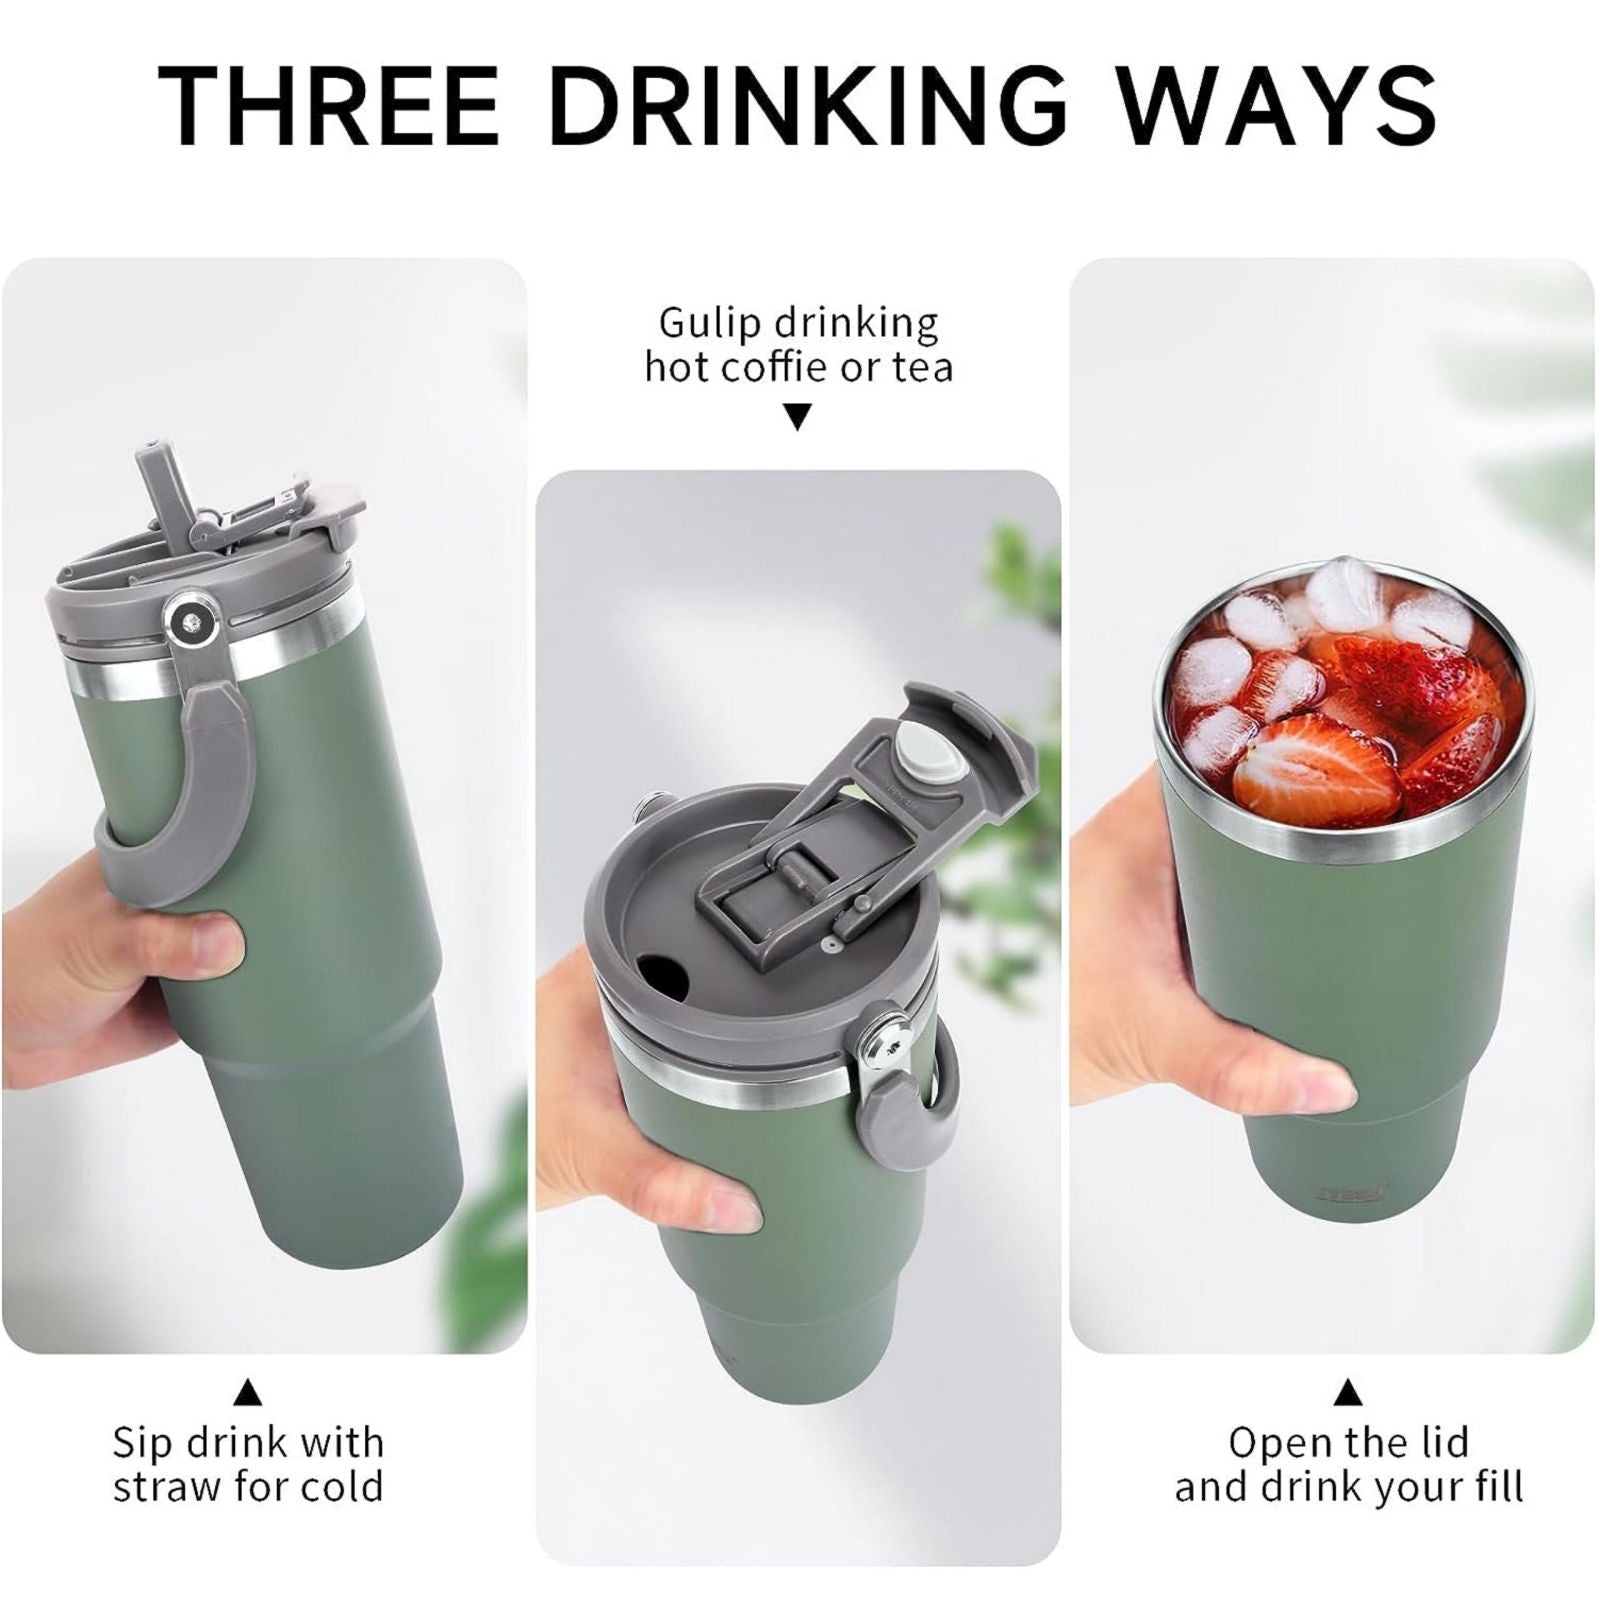 Stainless Steel Travel Mug with Leak-proof 2-in-1 Straw and Sip Lid, Vacuum Insulated Coffee Mug for Car, Office, Perfect Gifts, Keeps Liquids Hot or Cold